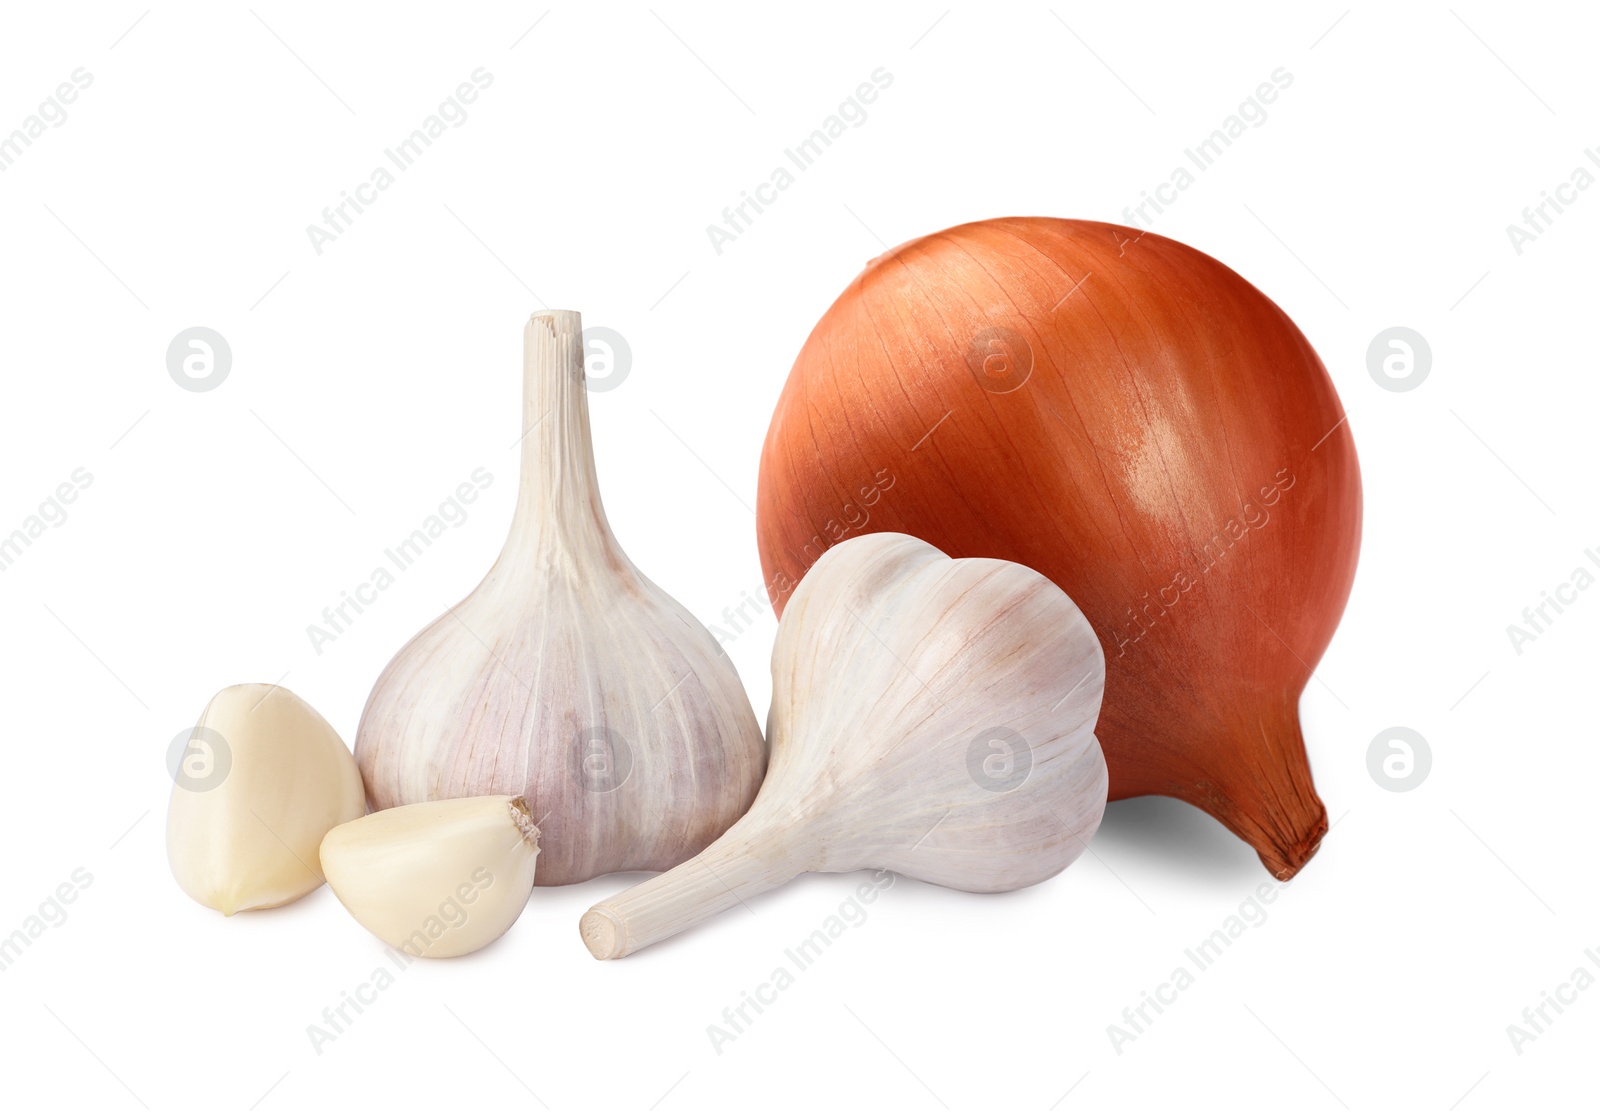 Image of Fresh onion, garlic bulbs and cloves on white background